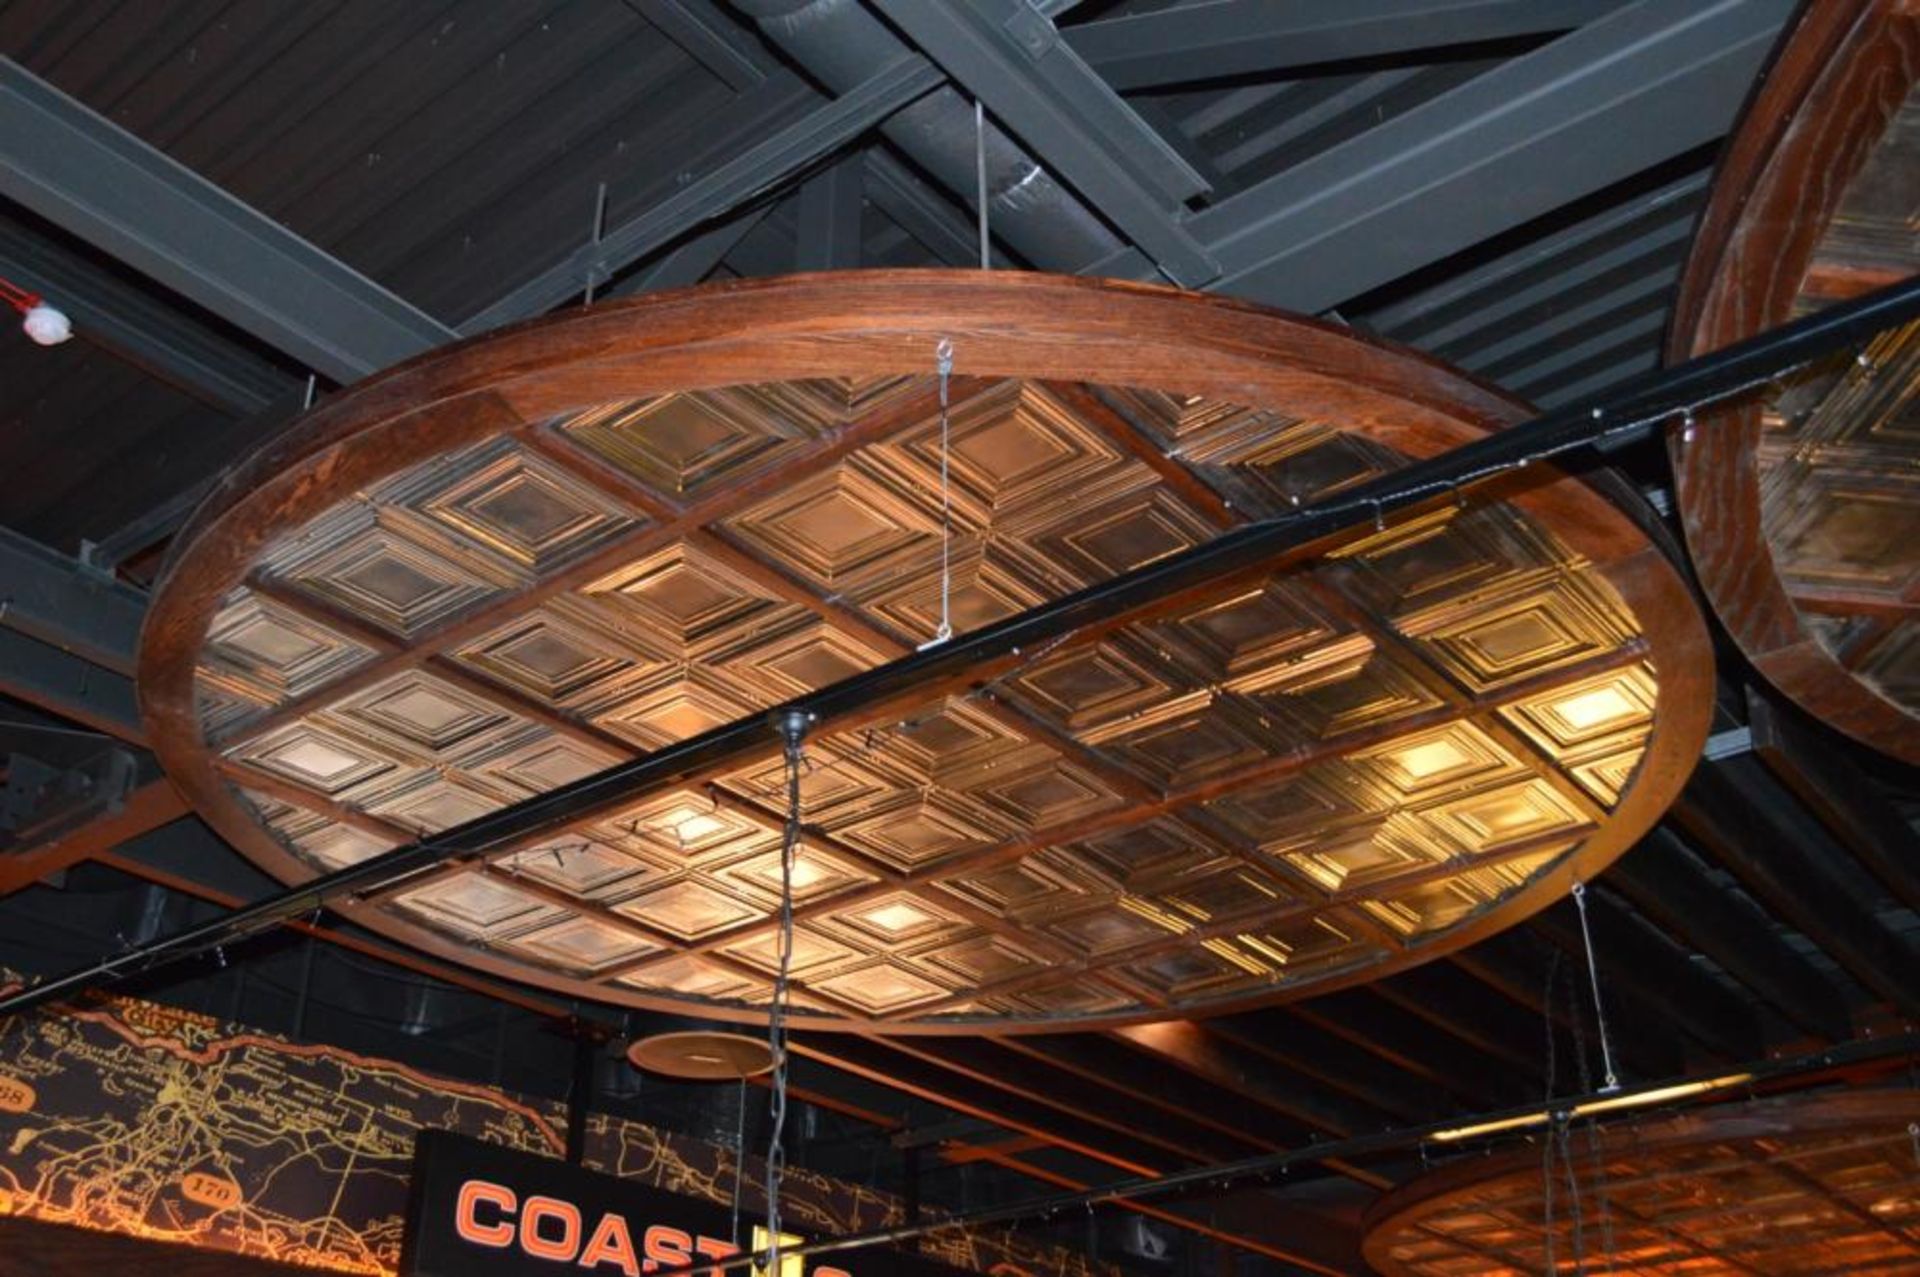 3 x Bespoke Suspended Round Ceiling Panels in Dark Wood With Glass Inserts - Approx 3 Meter Diameter - Image 5 of 6